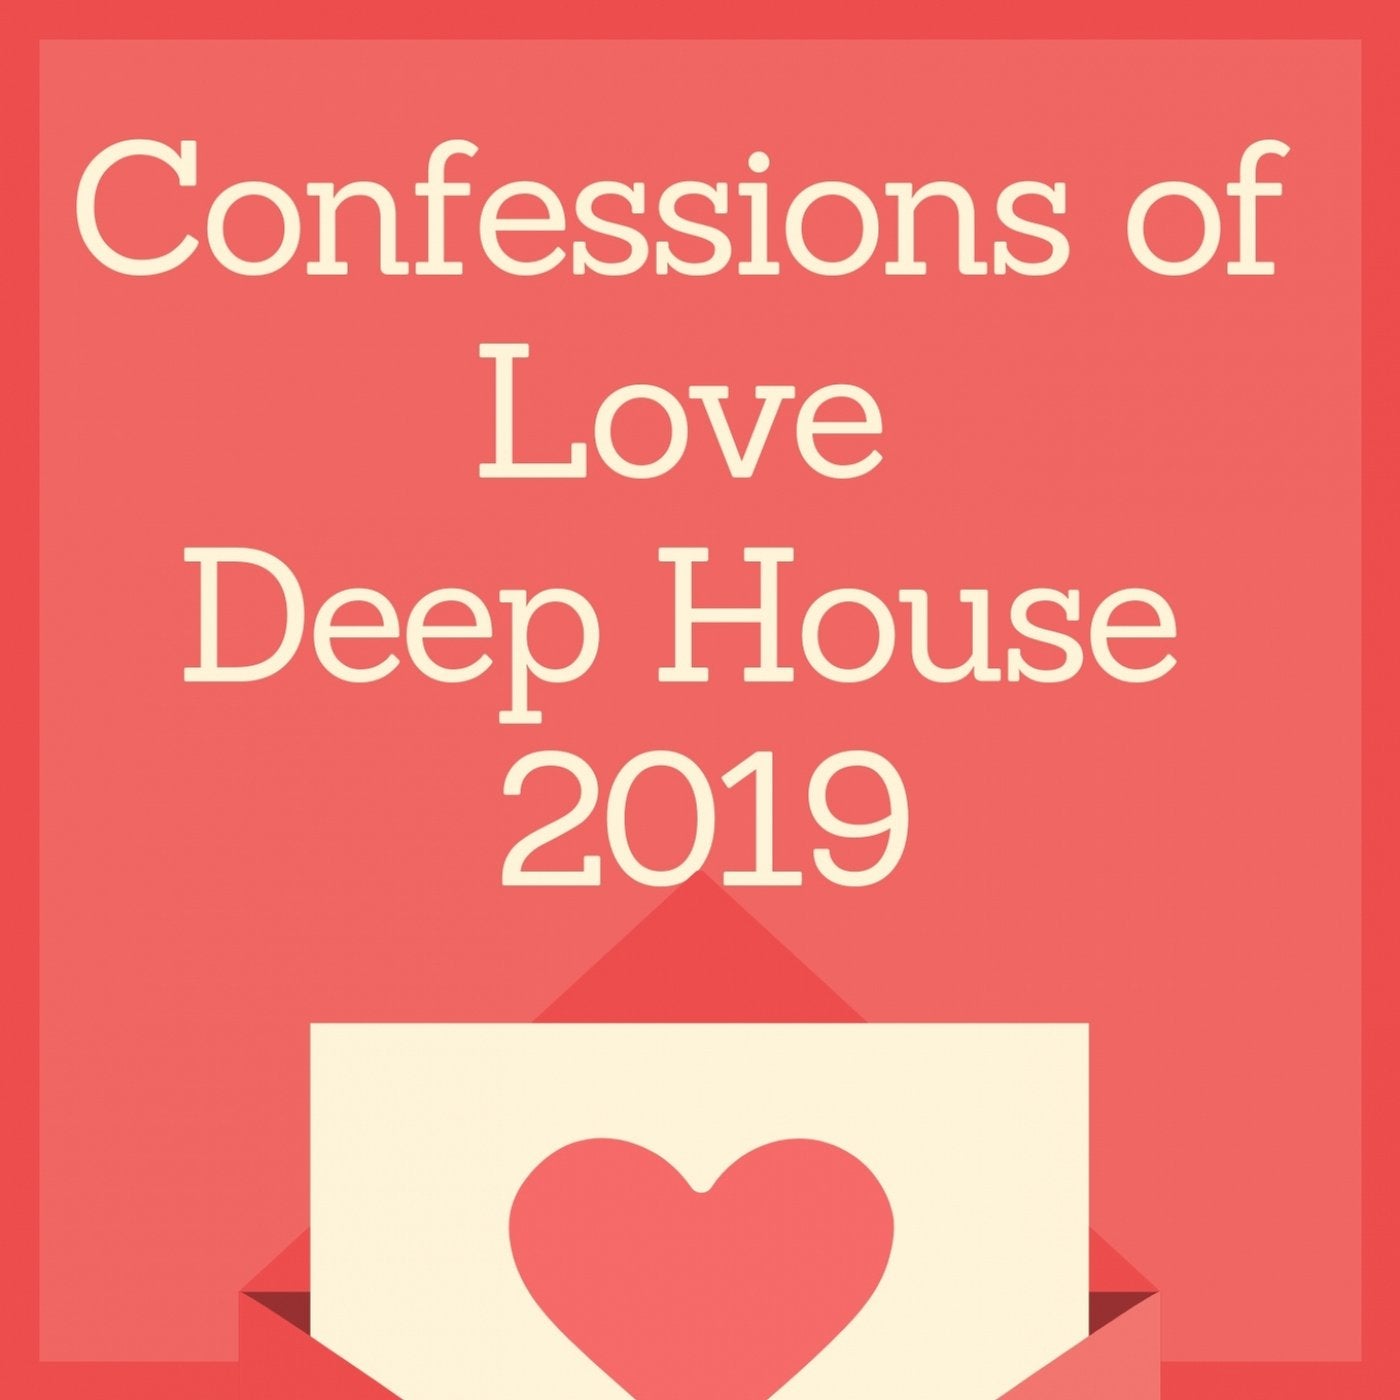 CONFESSIONS OF LOVE DEEP HOUSE 2019